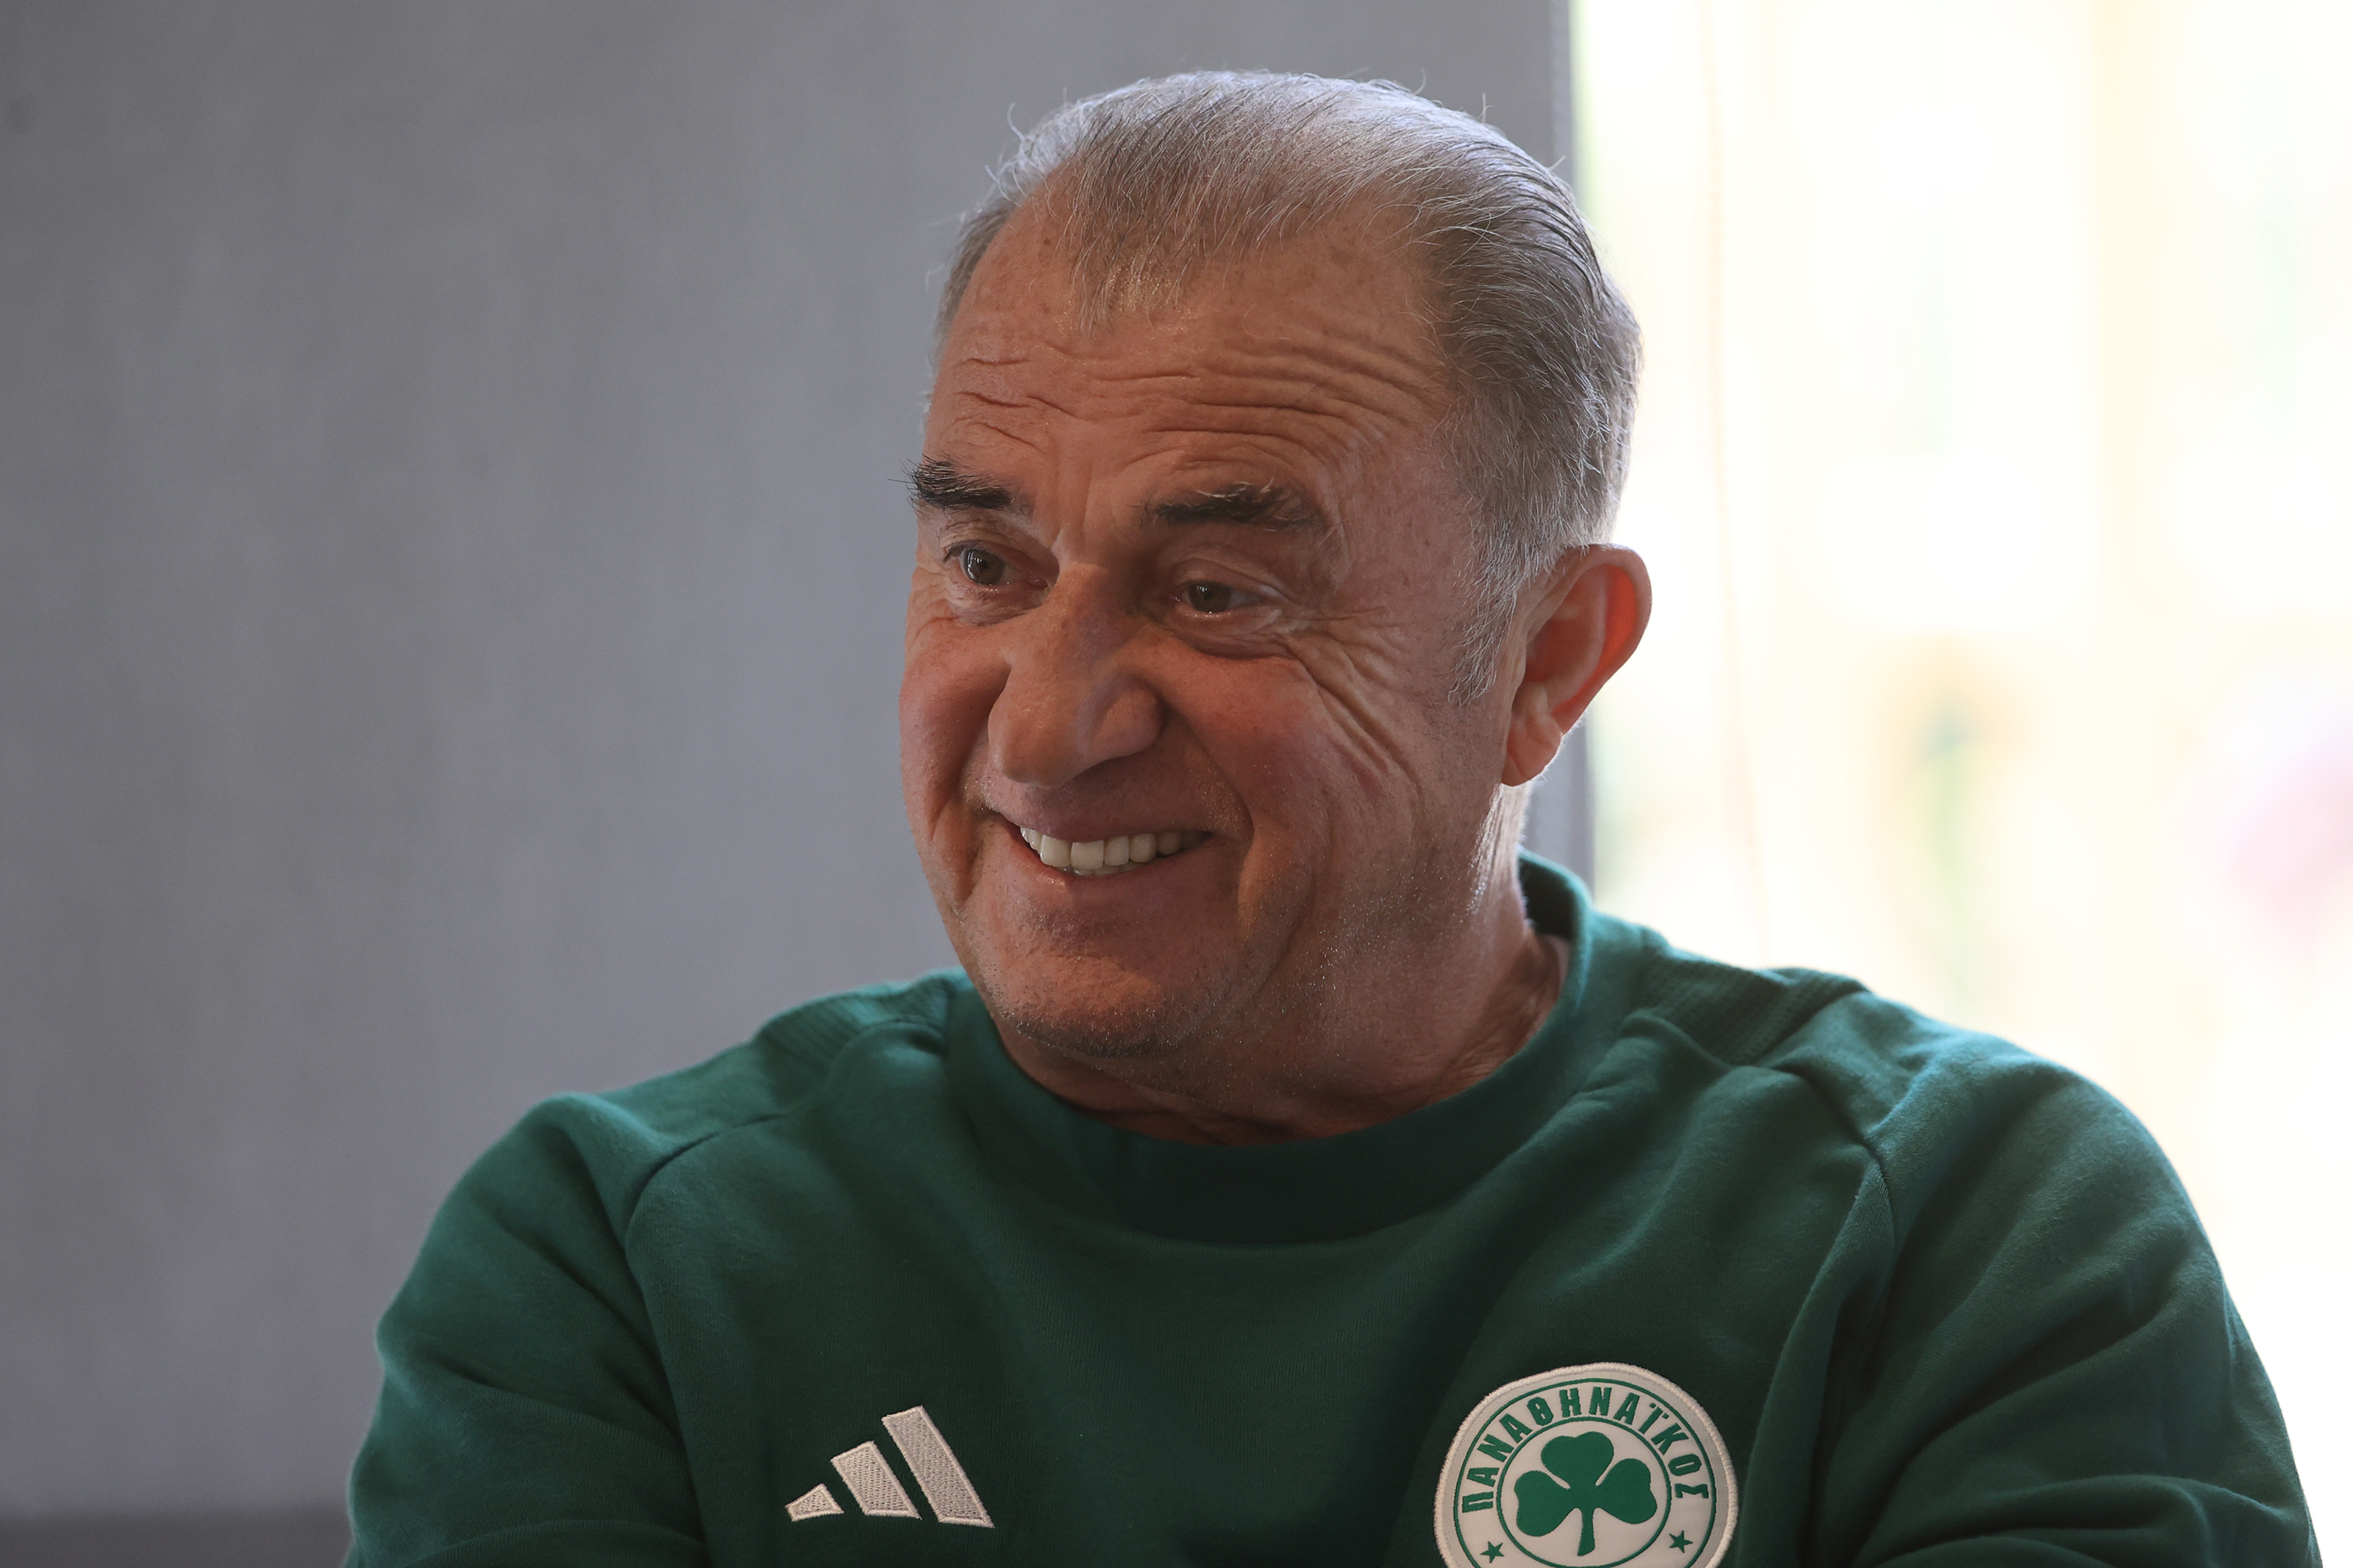 aa-20240411-34246532-34246530-head-coach-of-panathinaikos-fatih-terim-meets-with-journalists-in-athens.jpg